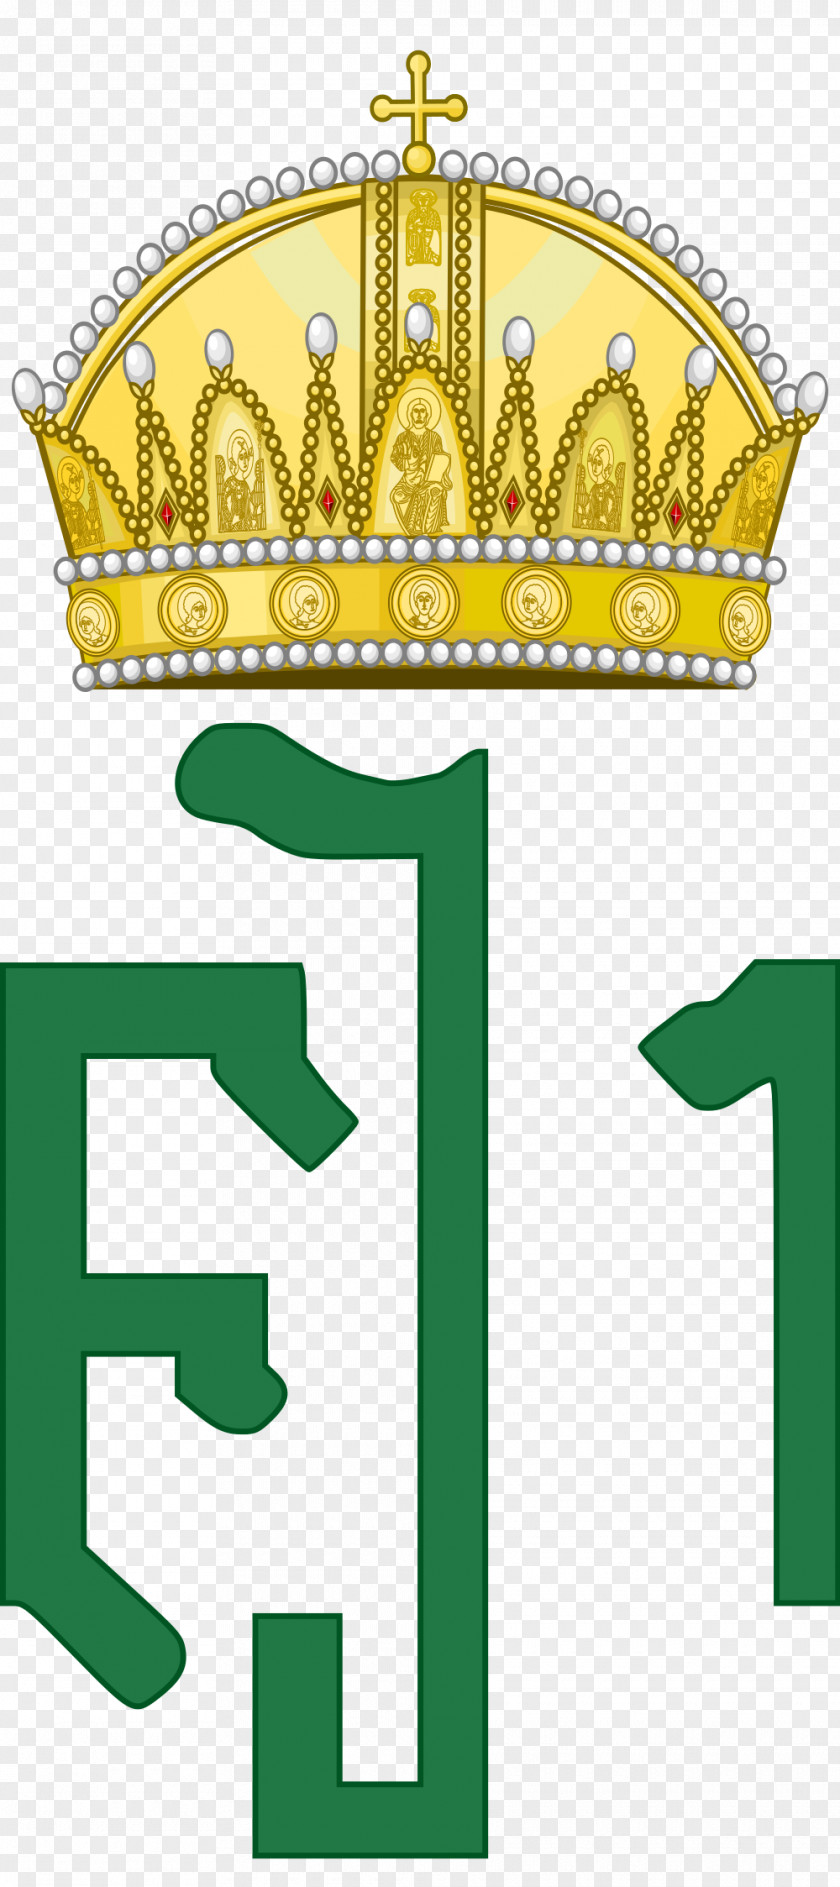 Royal Cypher King Of Hungary Monogram Emperor Clip Art PNG